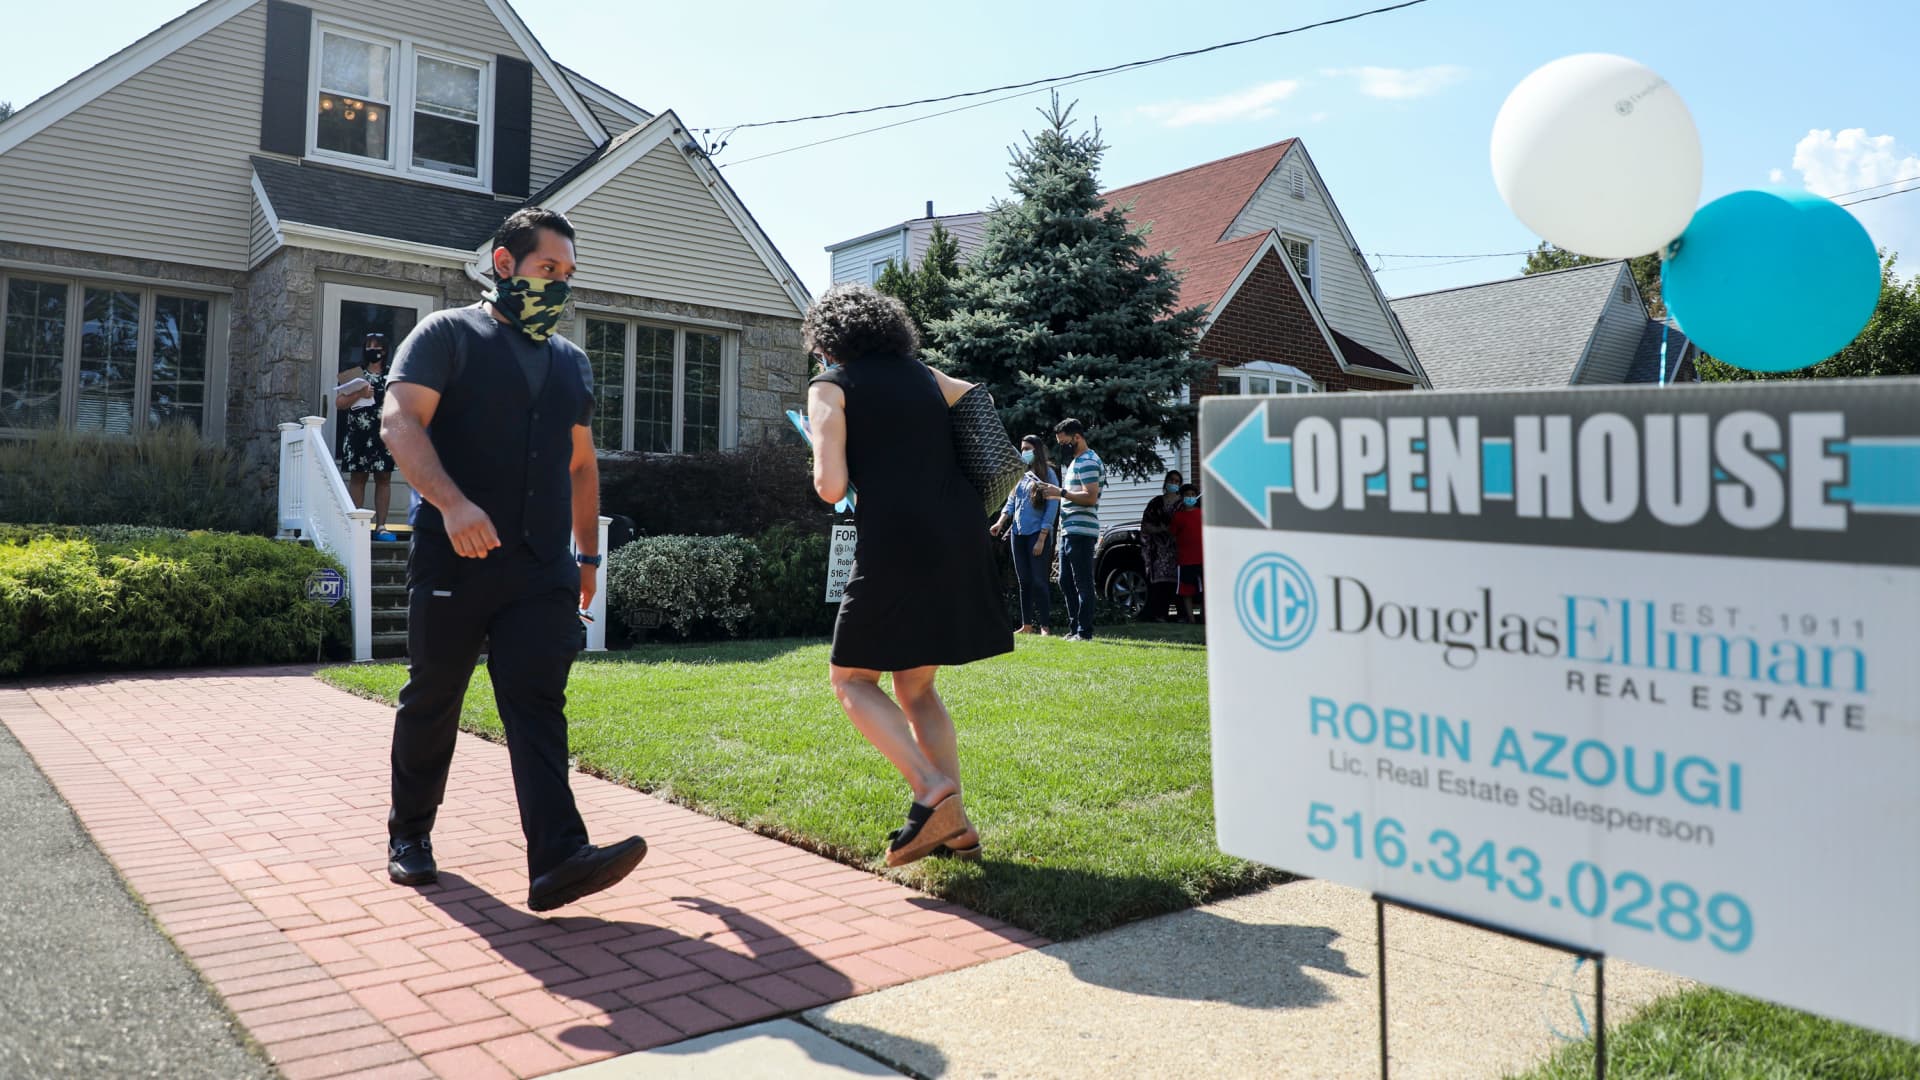 Confused about the housing market? Here’s what’s happening